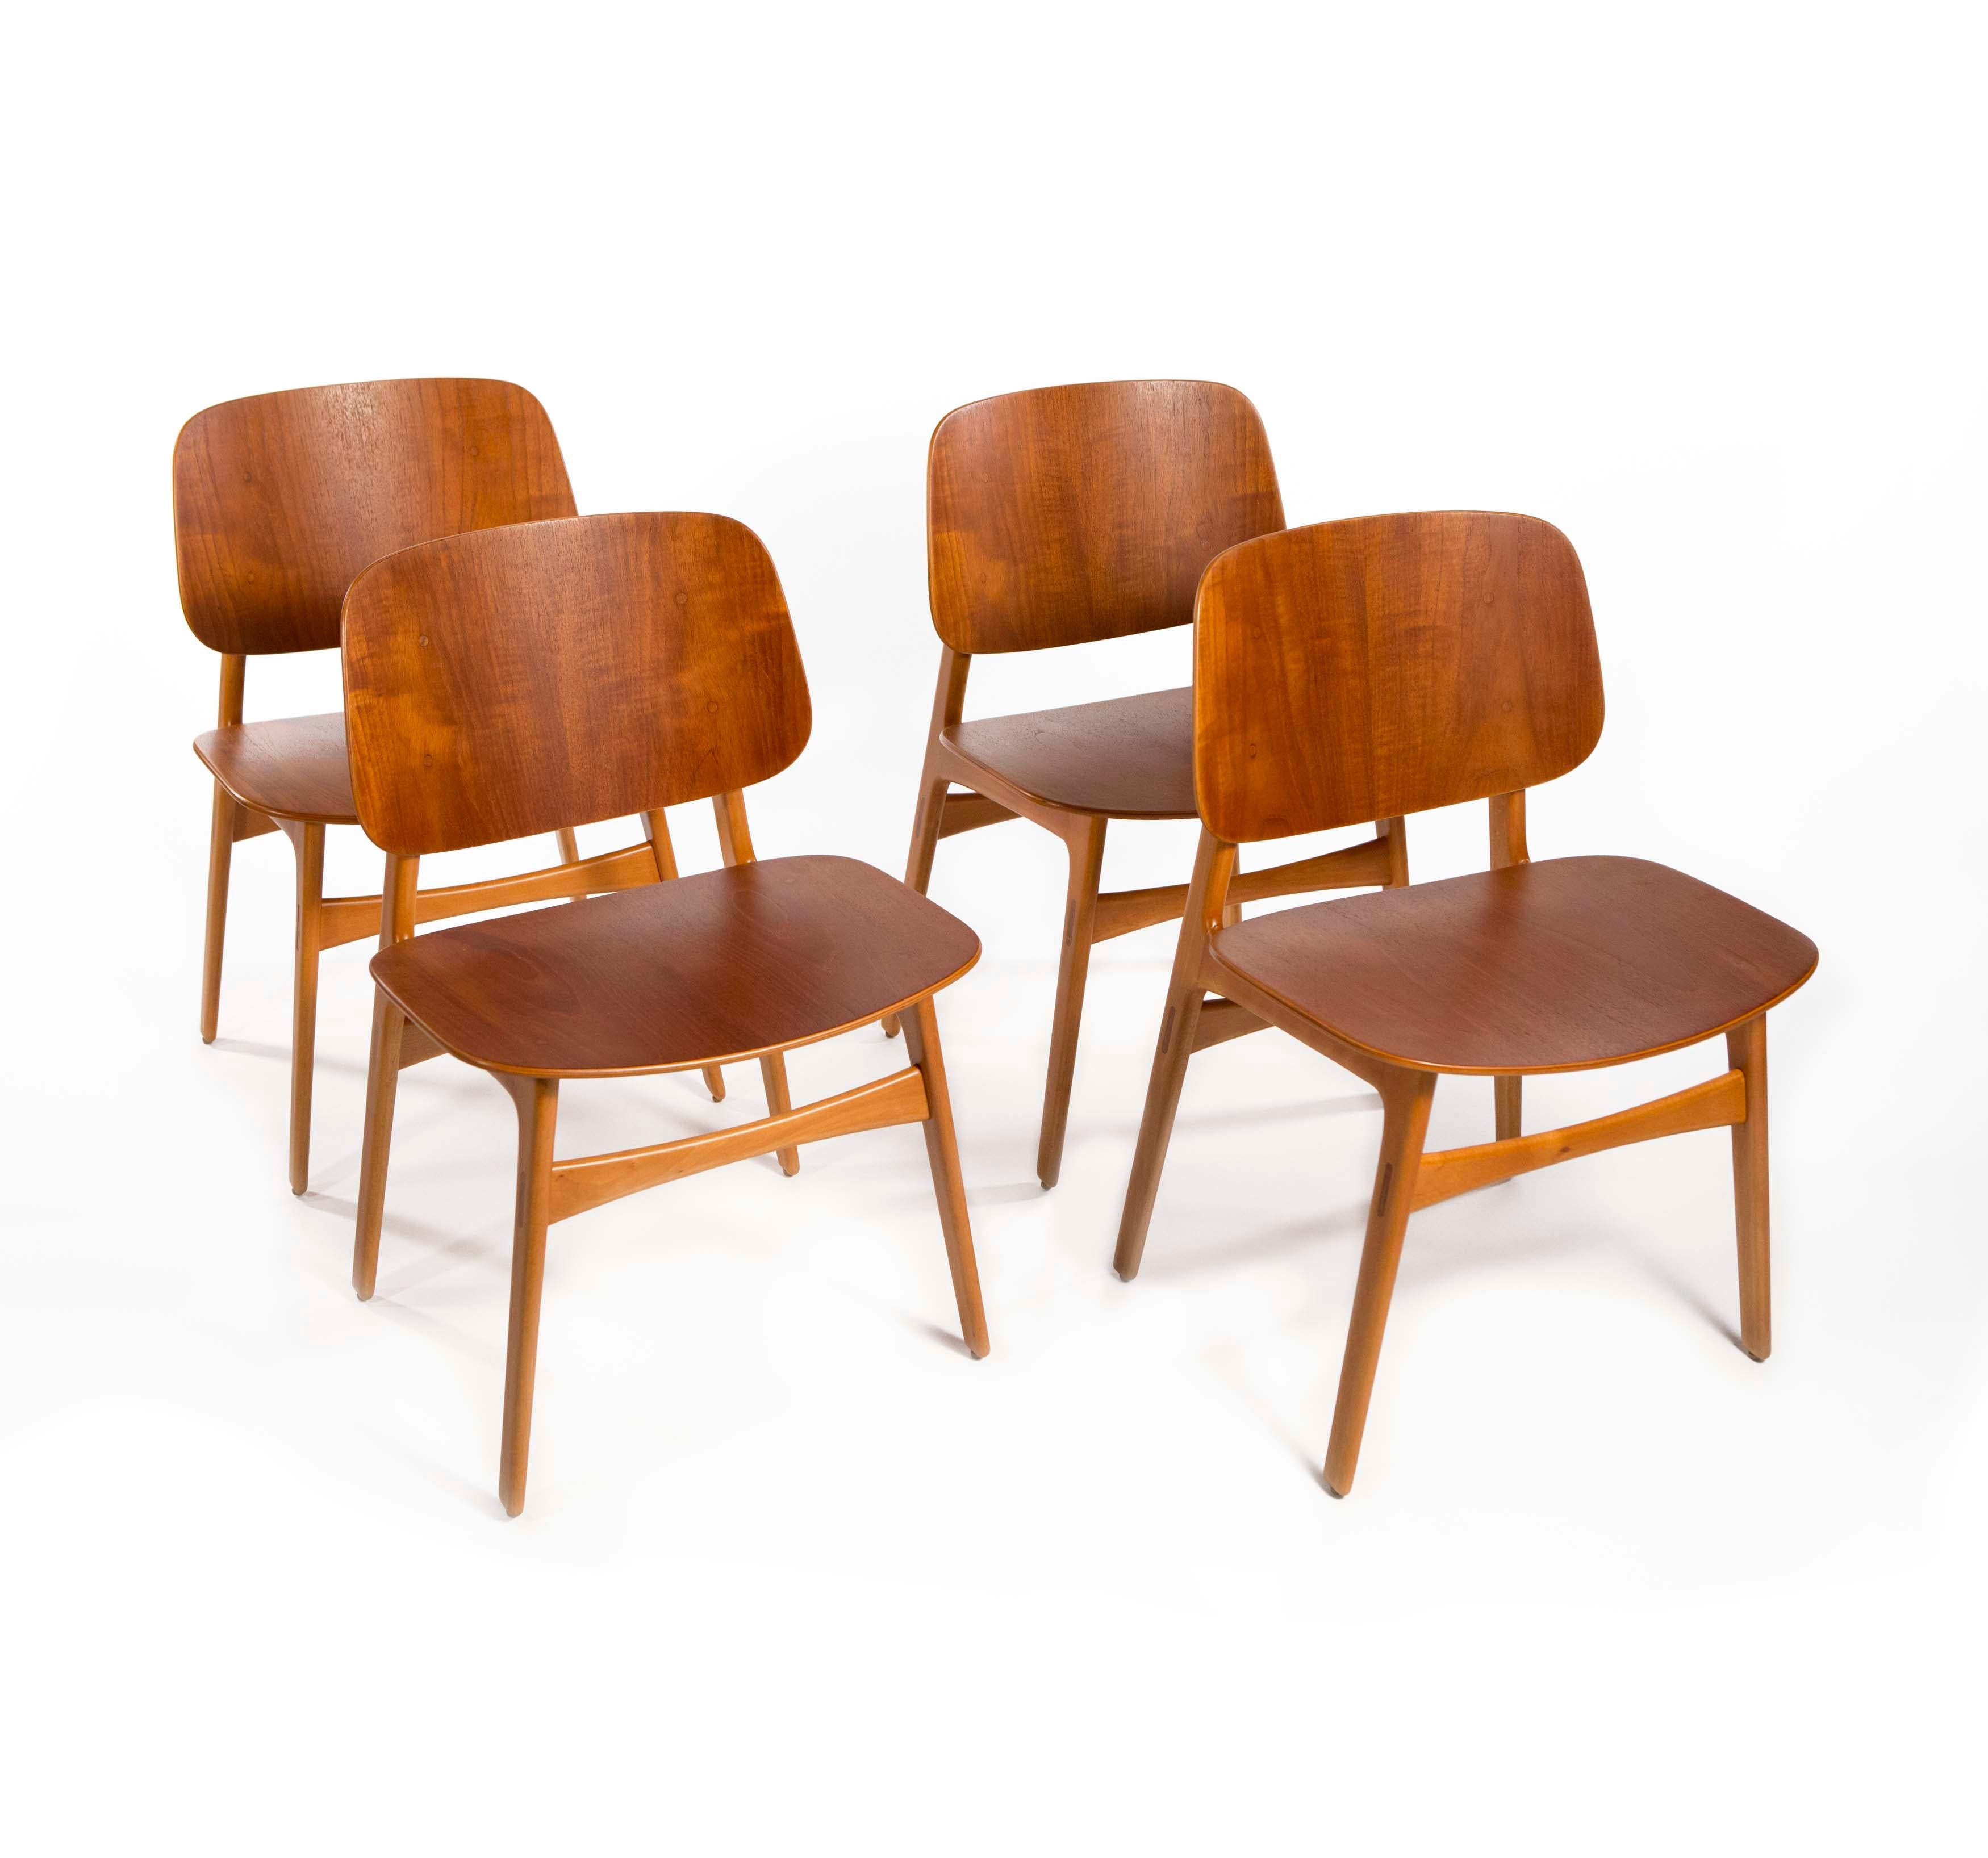 Børge Mogensen Set of 4 Dining Chairs Model 155 for Søborg Møbler Denmark 1950's

This is a beautiful set of 4 dining chairs designed by Borge Mogensen in 1949 for Soborg Denmark. The Model 155 has a solid beech wood frame and teak plywood seat